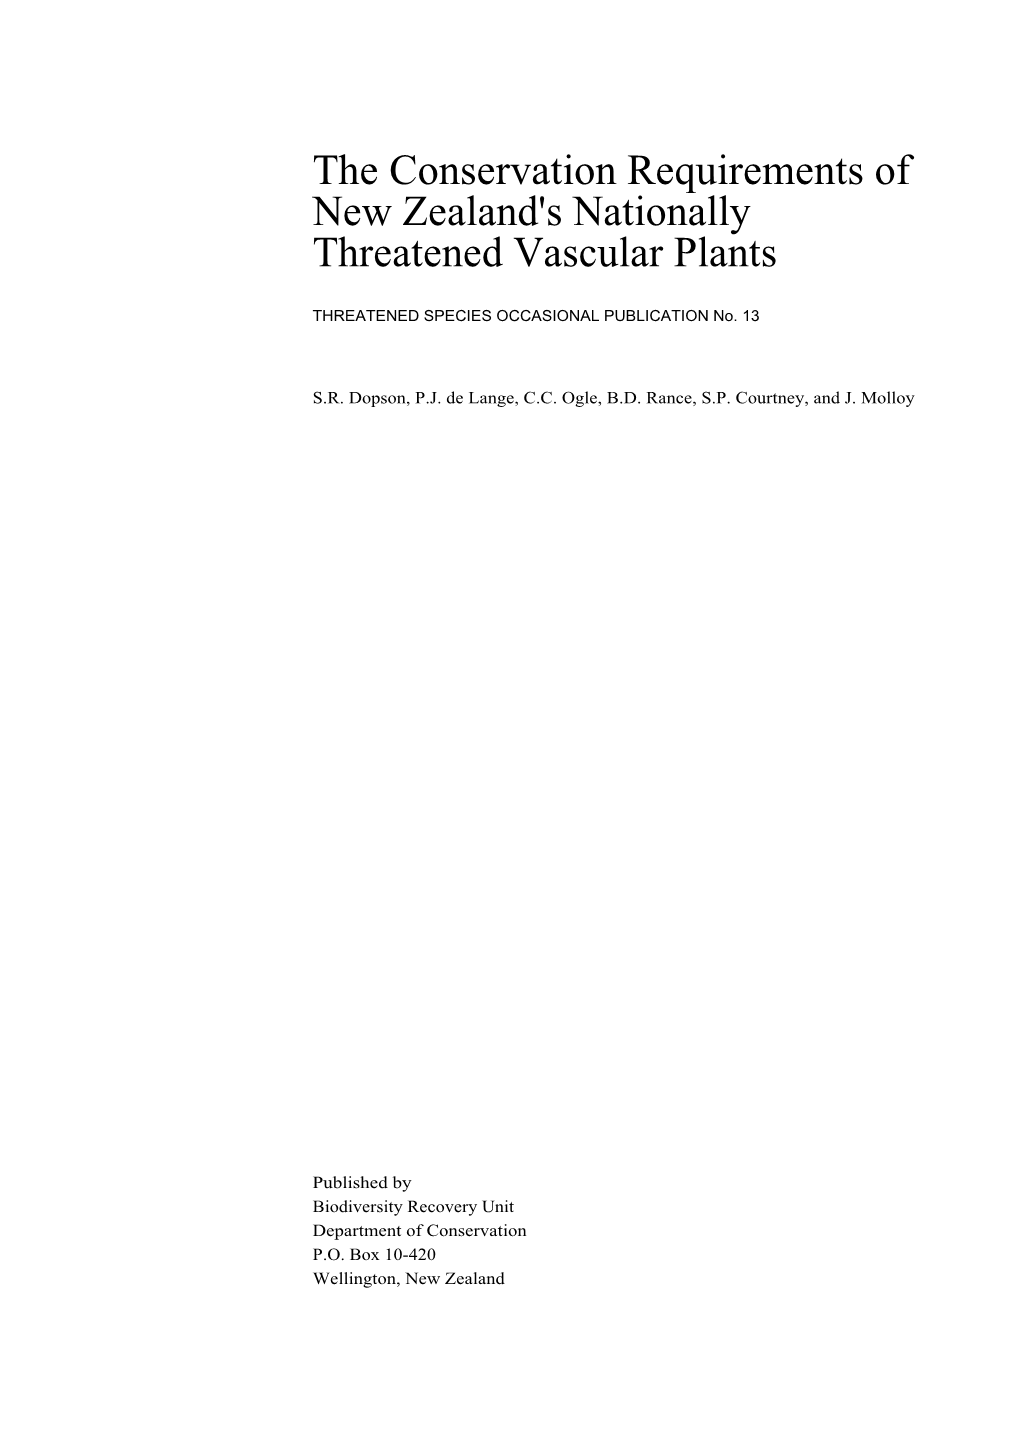 The Conservation Requirements of New Zealand's Nationally Threatened Vascular Plants